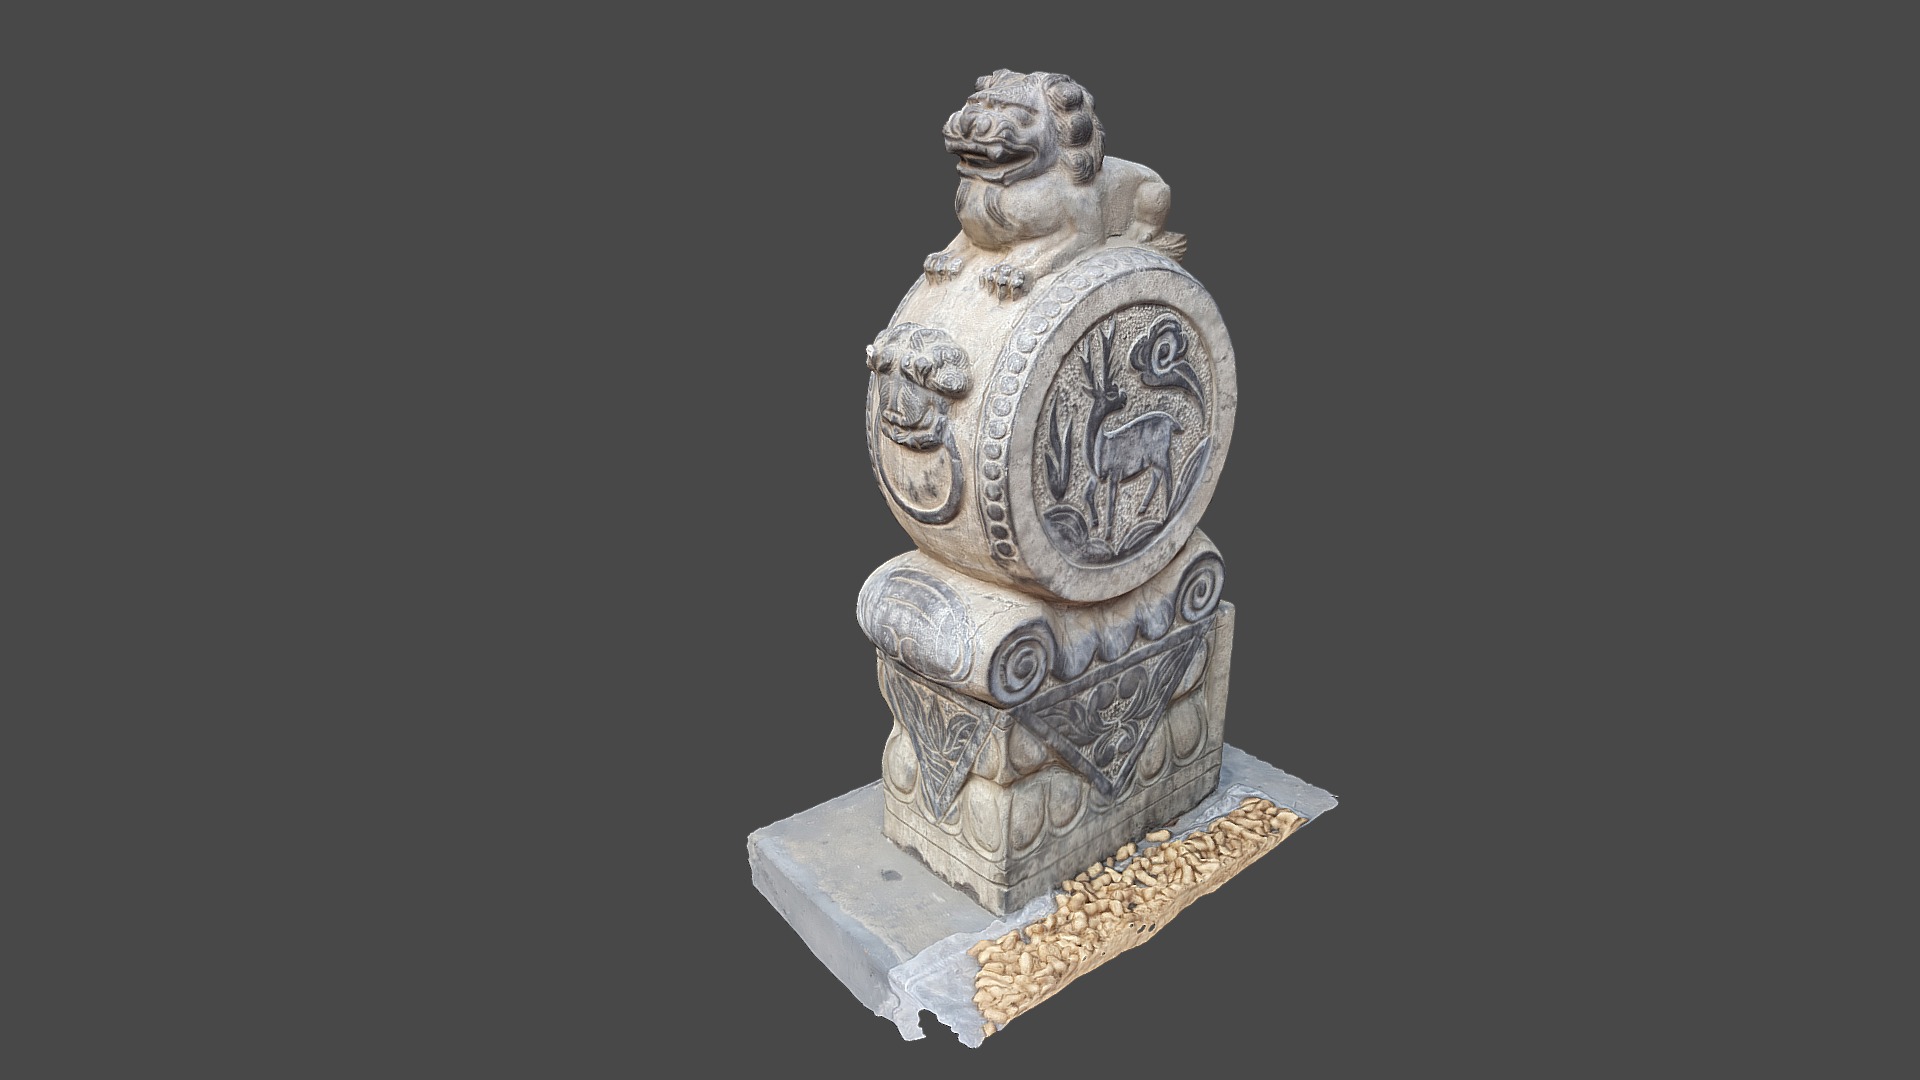 3D model 2016-09 – Beijing 11 - This is a 3D model of the 2016-09 - Beijing 11. The 3D model is about a stone statue of a cat.